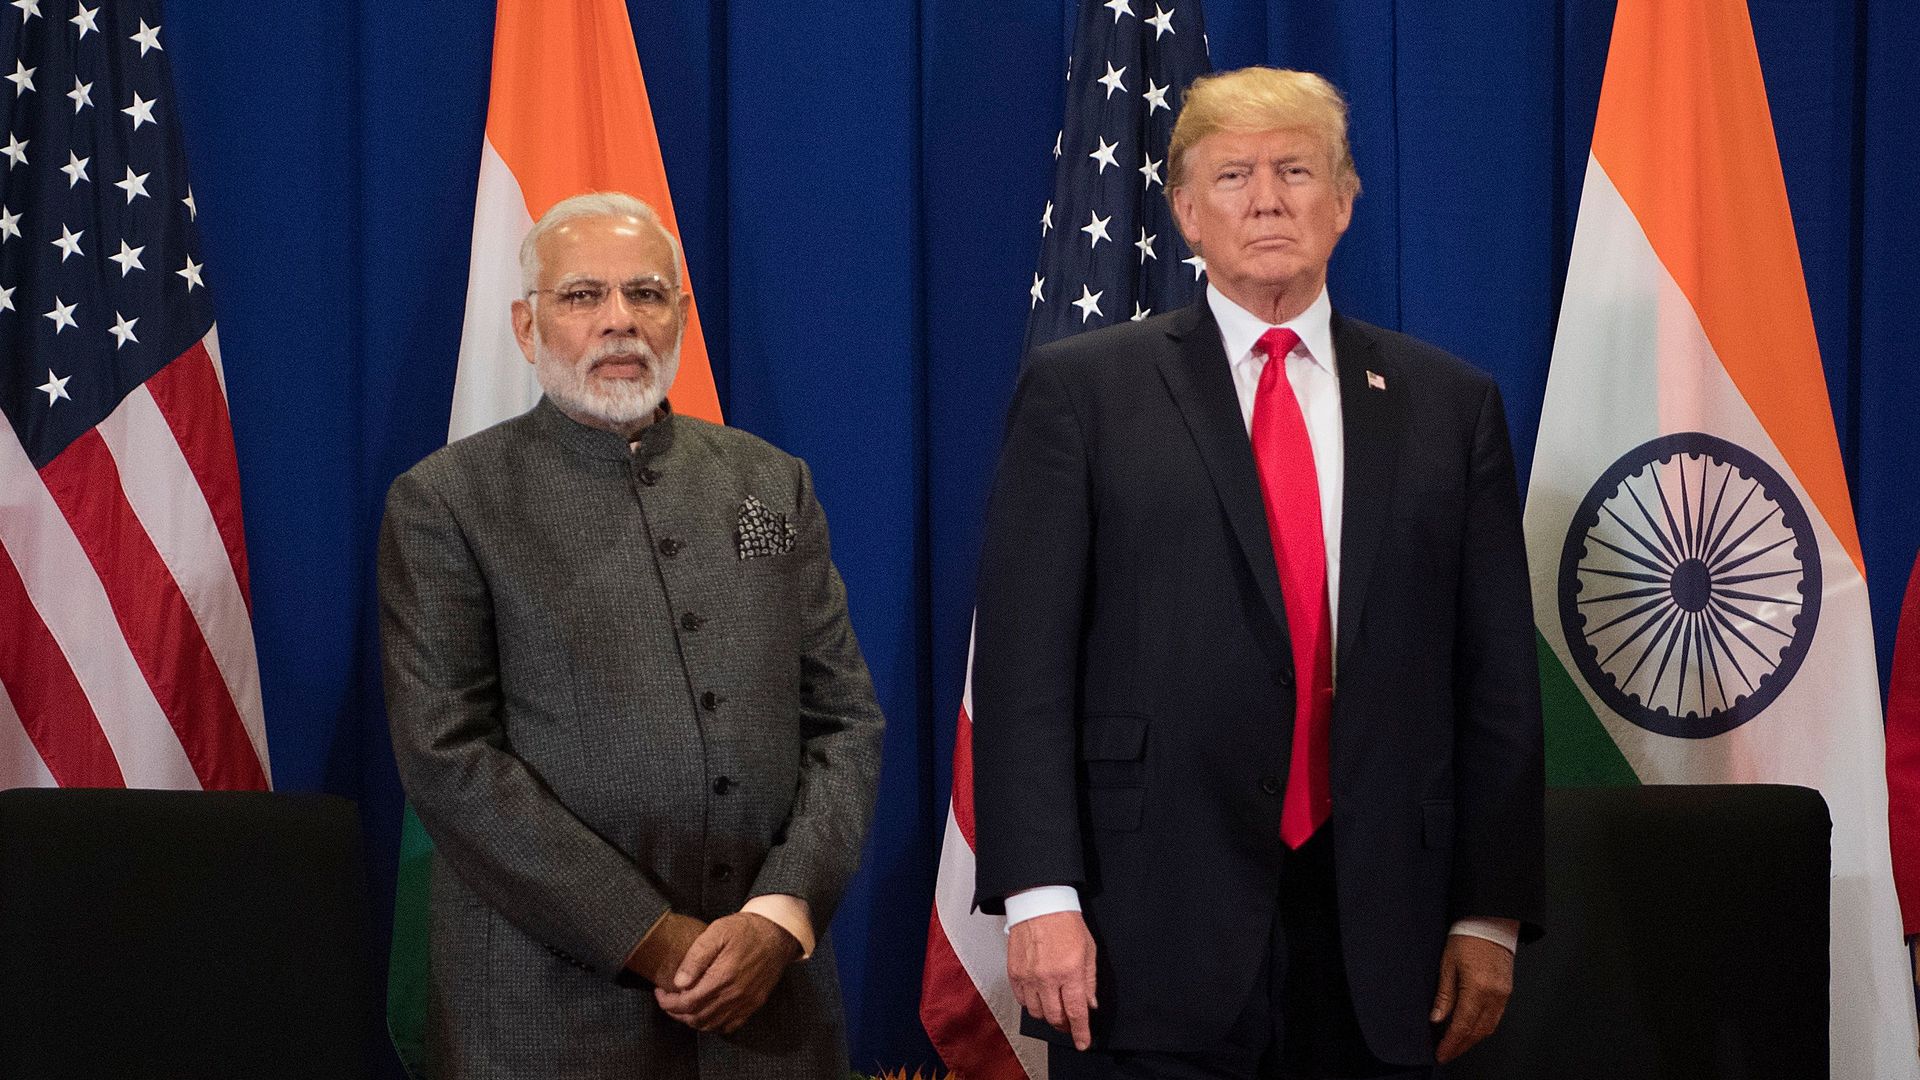 President Trump says Narendra Modi's India failed to assure the U.S. it'd provide reasonable access to its markets.